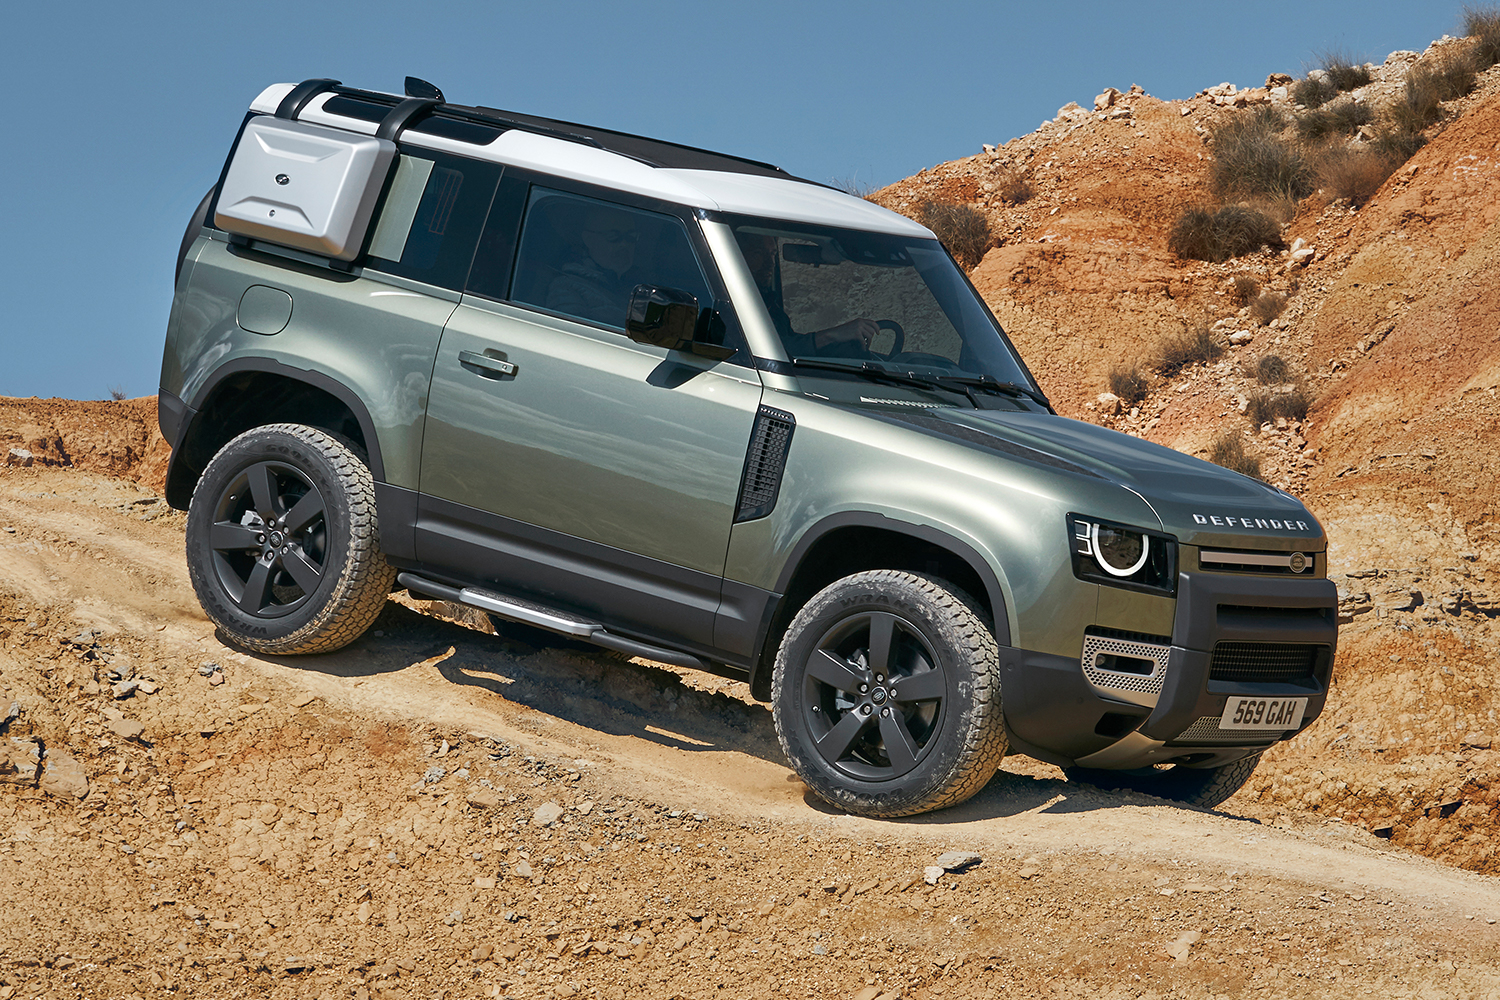 Is it me or does the new 2020 Land Rover Defender look nothing like a